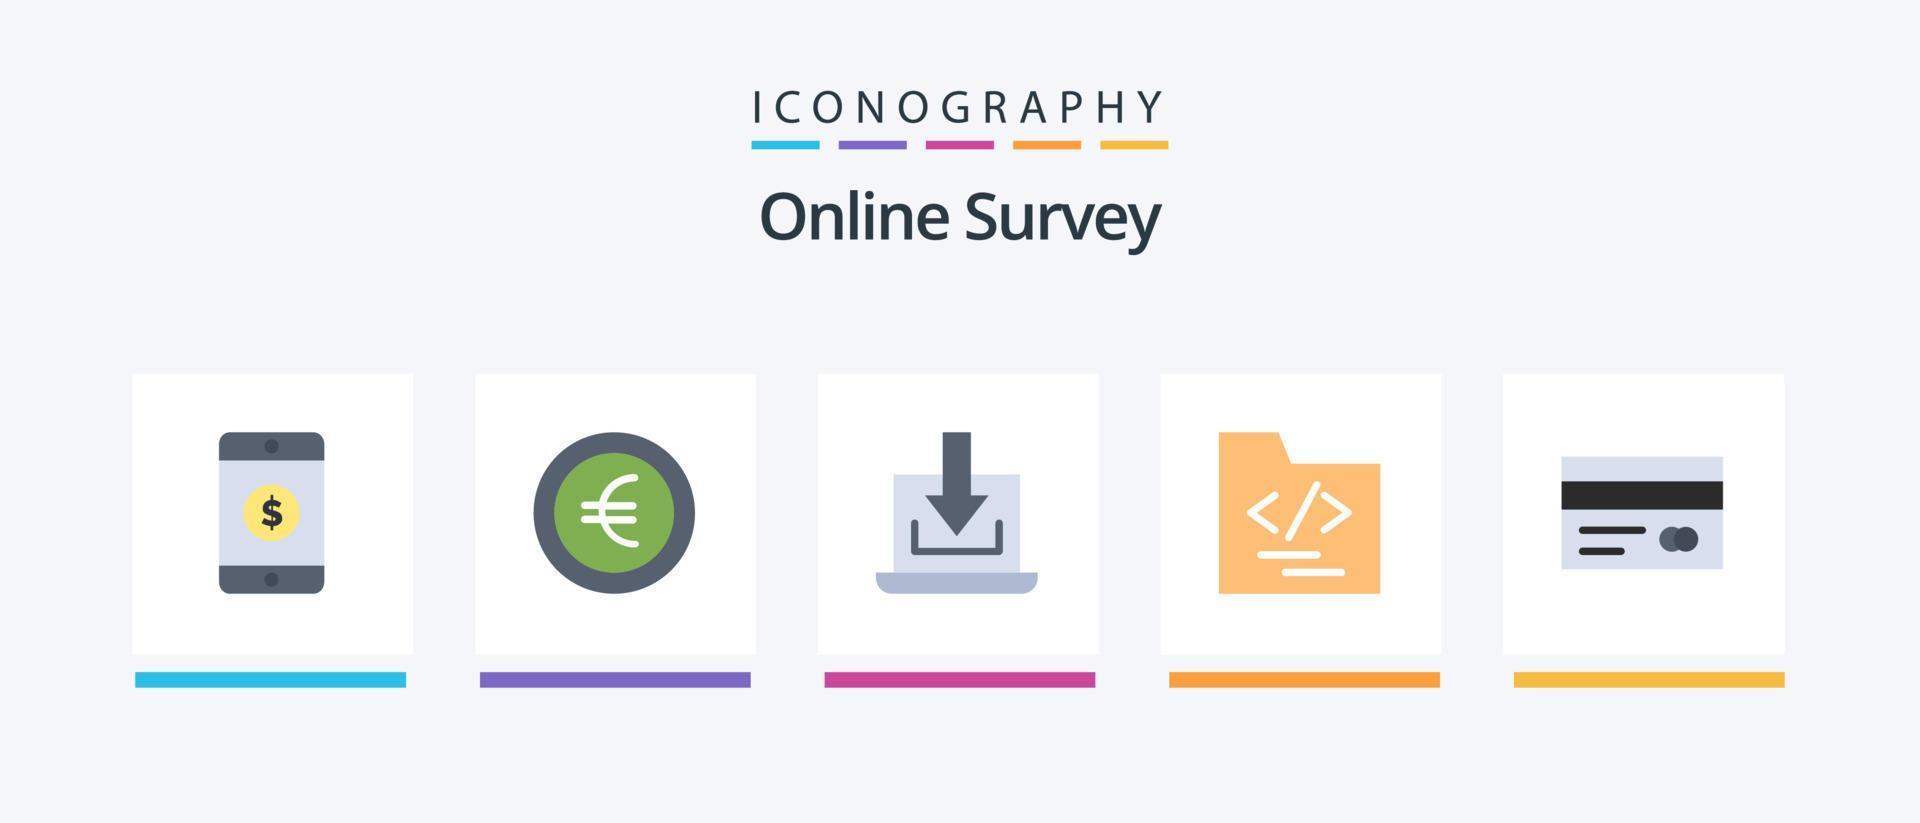 Online Survey Flat 5 Icon Pack Including . credit. down. card. business. Creative Icons Design vector